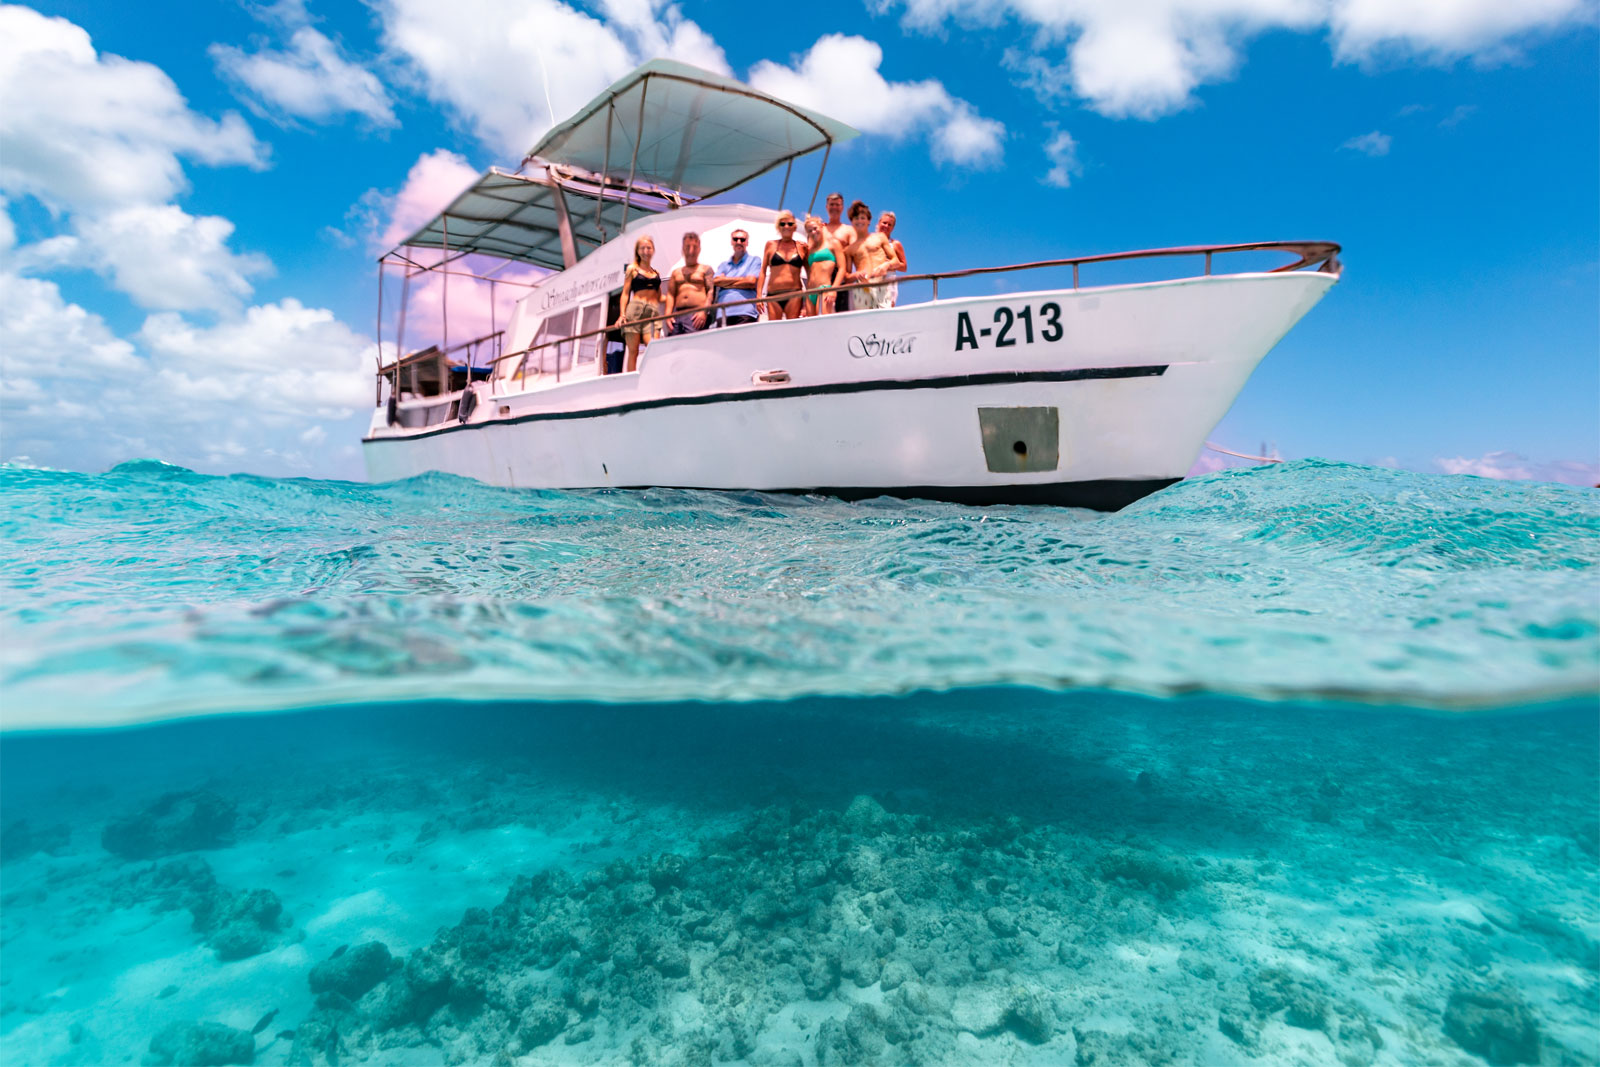 strea charters boat on the crystal blue waters. Picture is half above water, half under water.